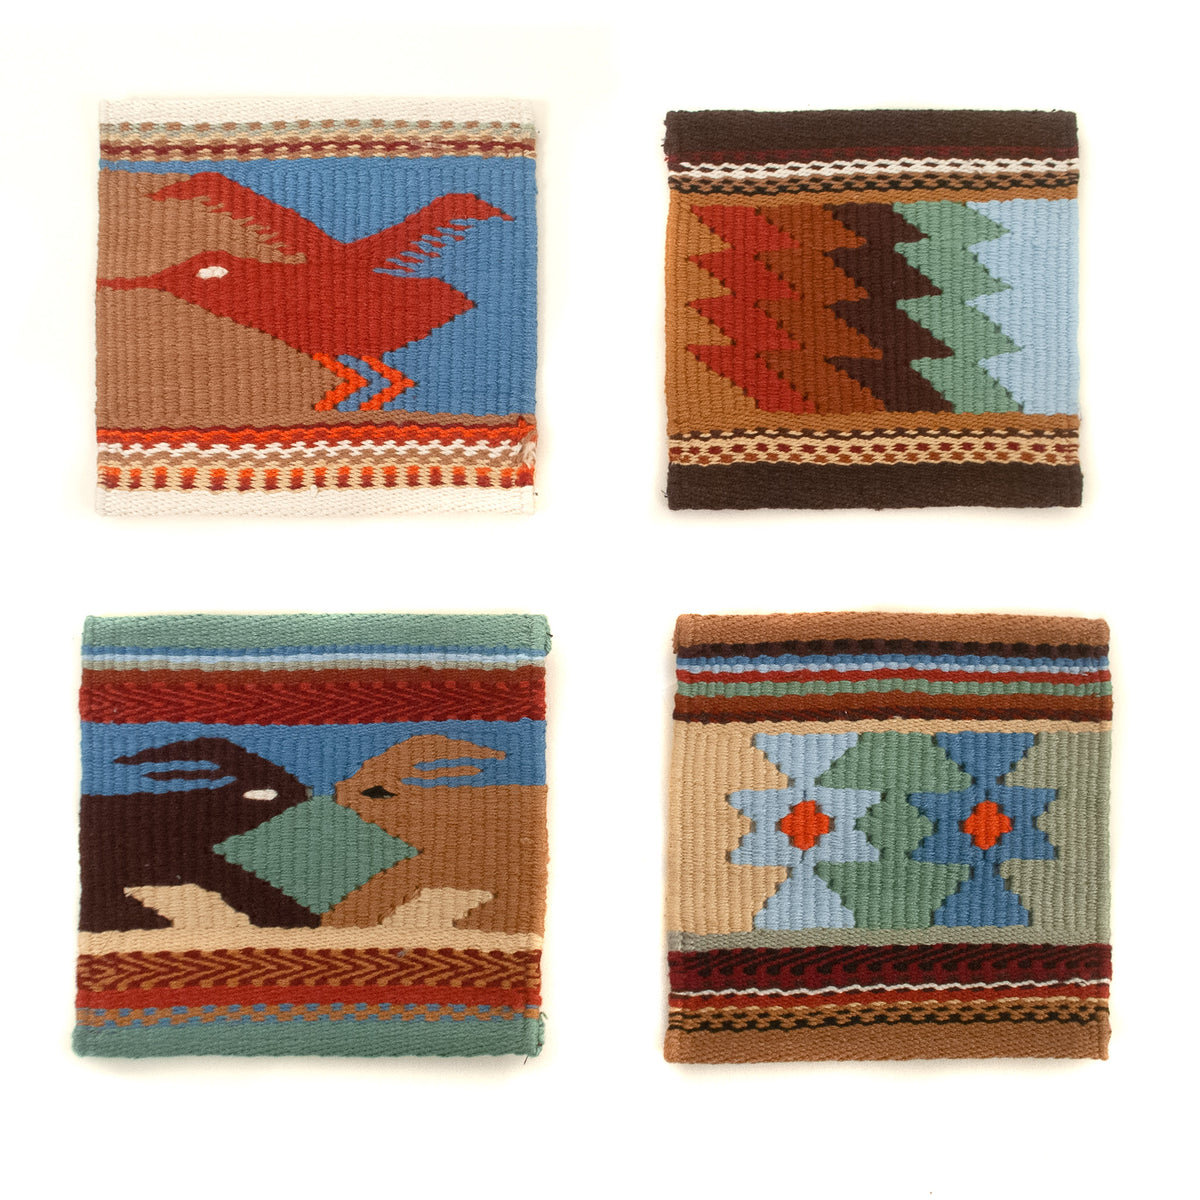 Handwoven Tapestry Coaster Set in Madre Tierra